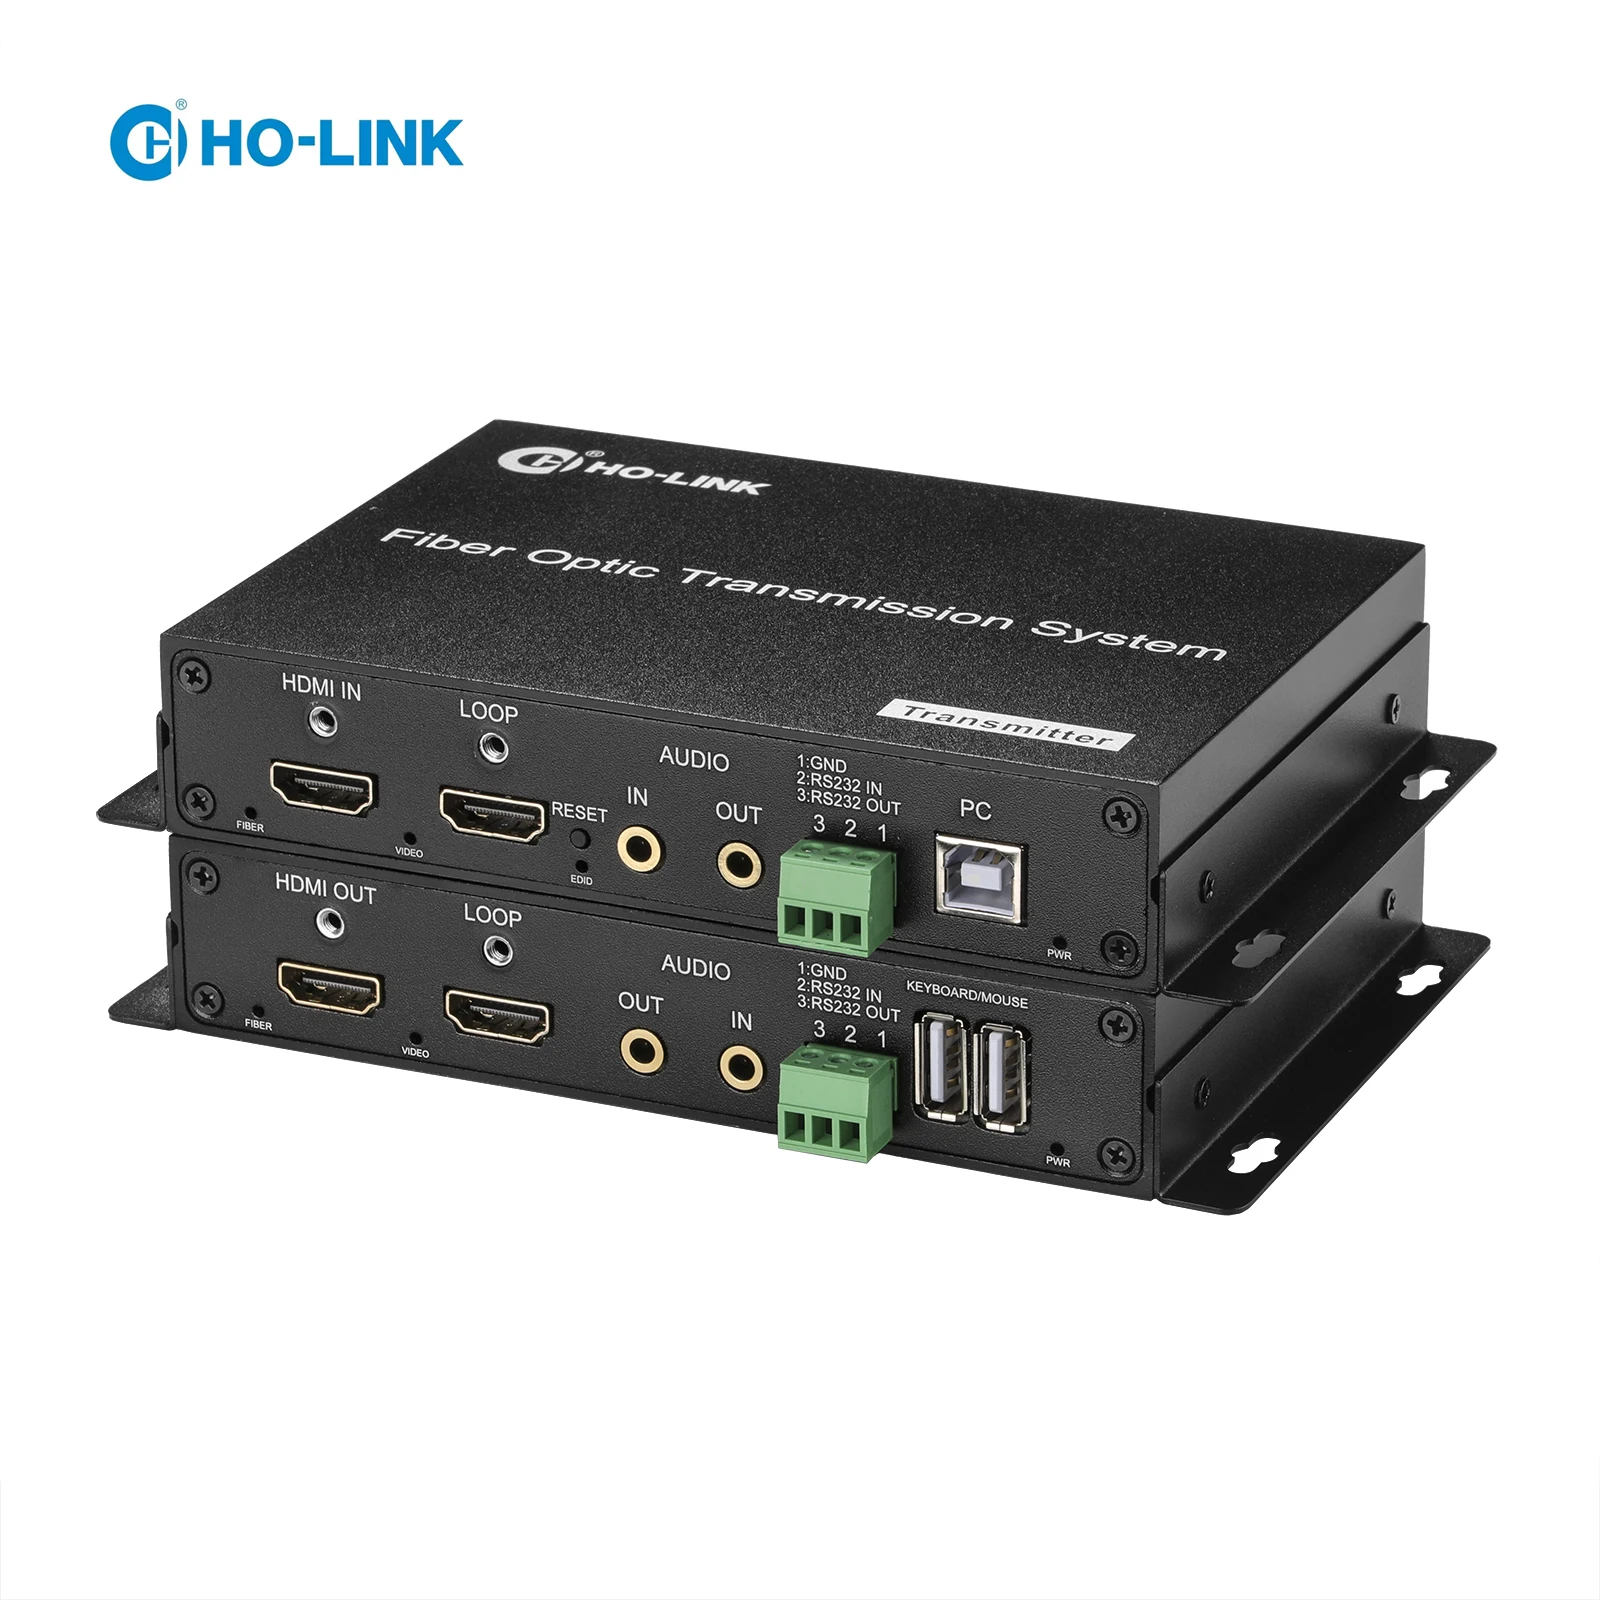 4K@60HZ HDMI to Fiber Optic Converter with KVM/data/Audio Extender with Loop Out Over LC Optic Fiber Cable 4 ch rca audio over fiber extender 20 km 2 km fiber rca audio to fiber optic converter